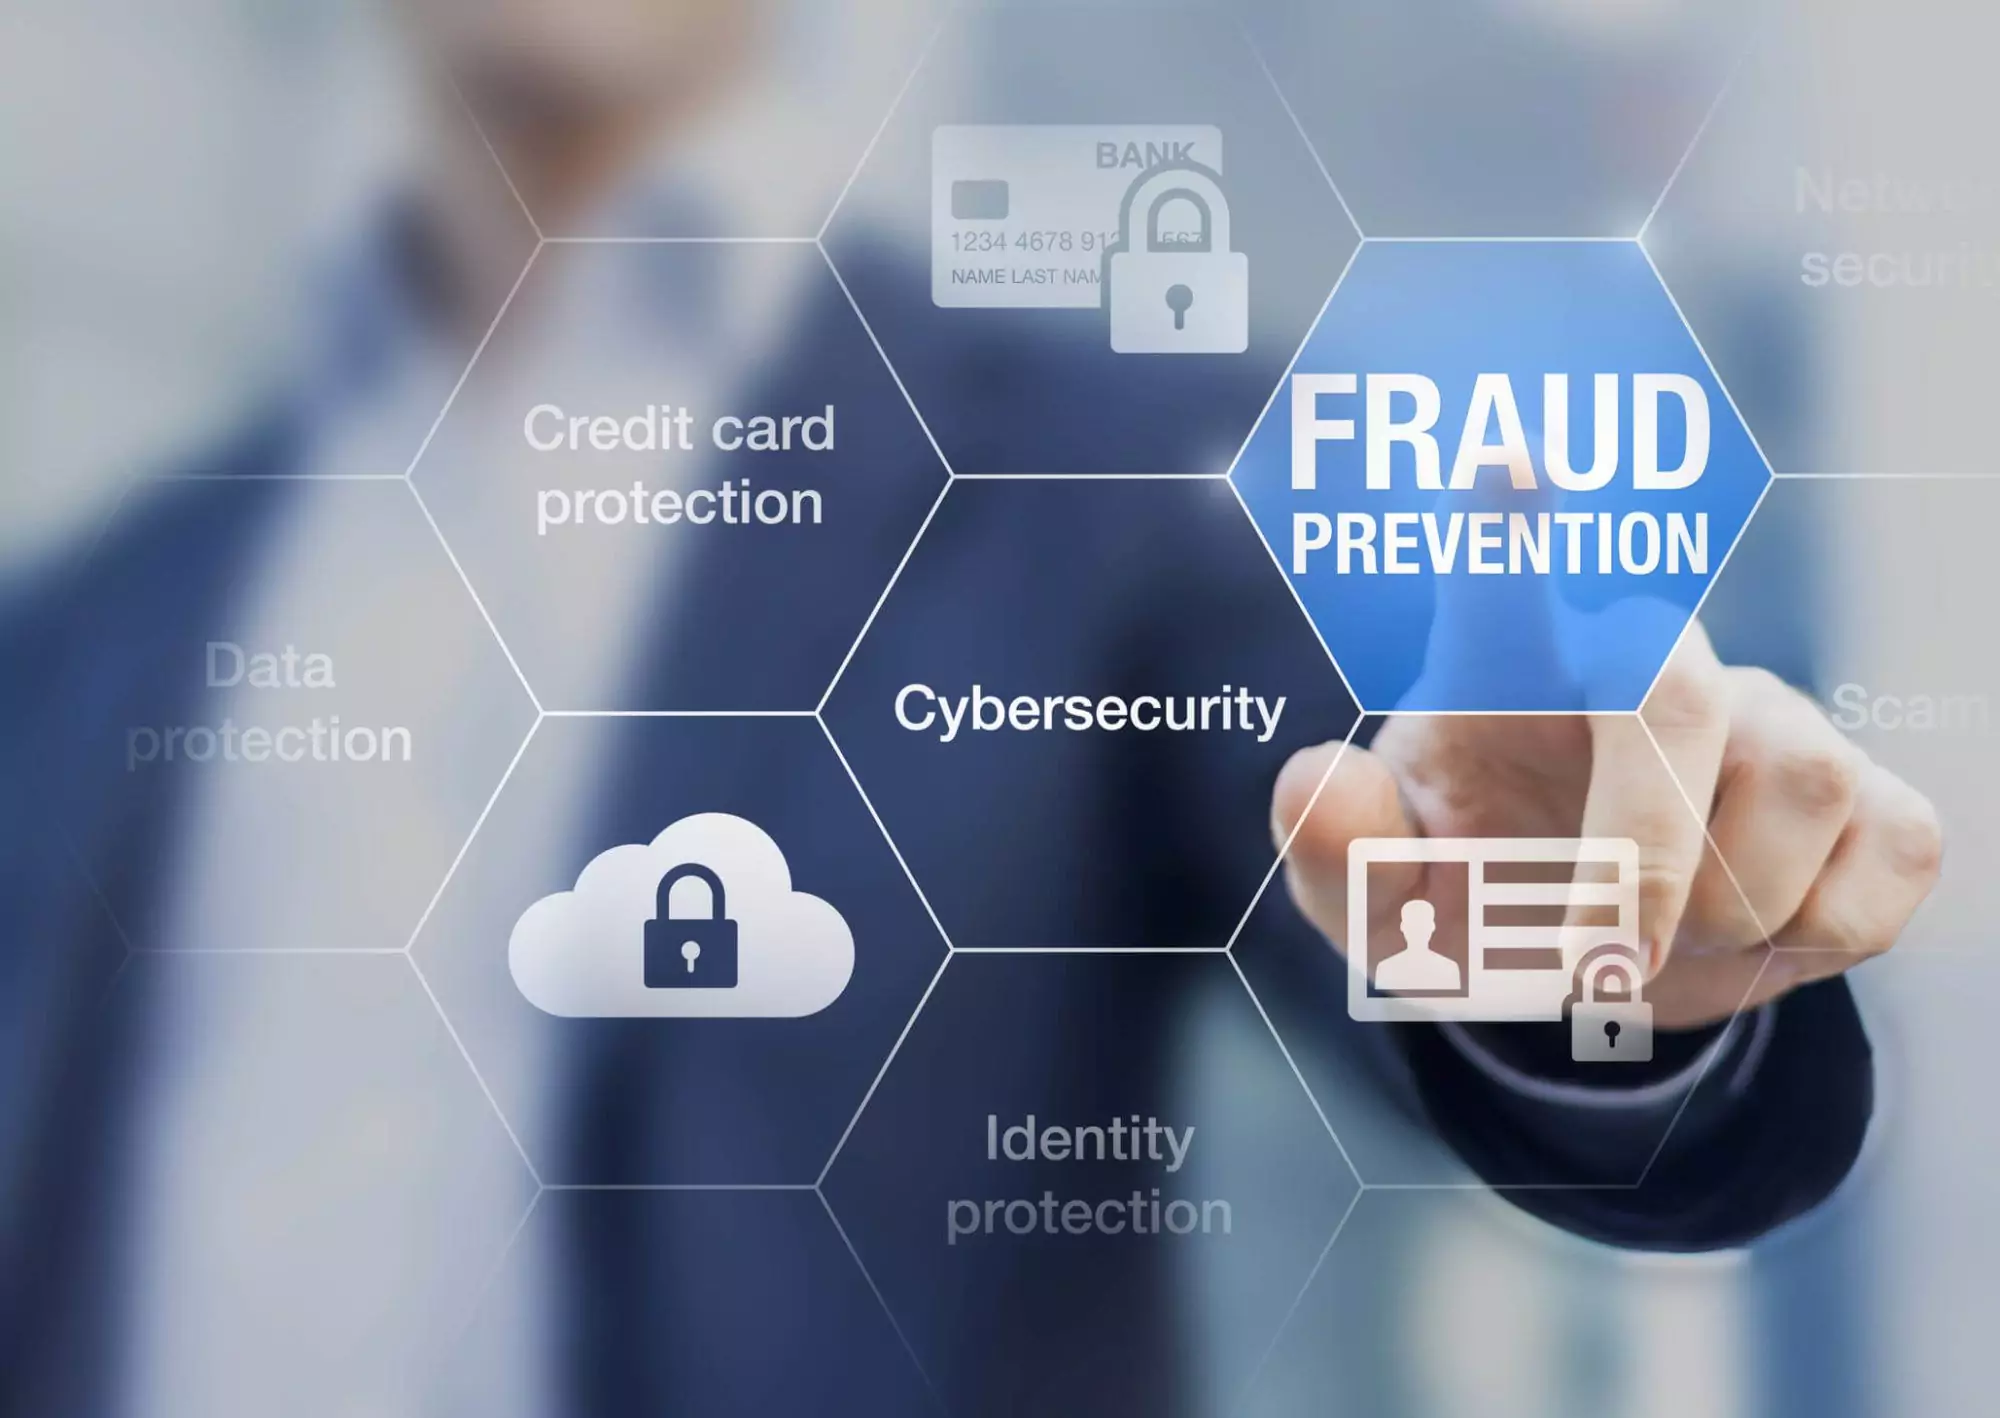 Information Security, Fraud Prevention, IT Security, Blough Tech, Data Management, Document Scanning